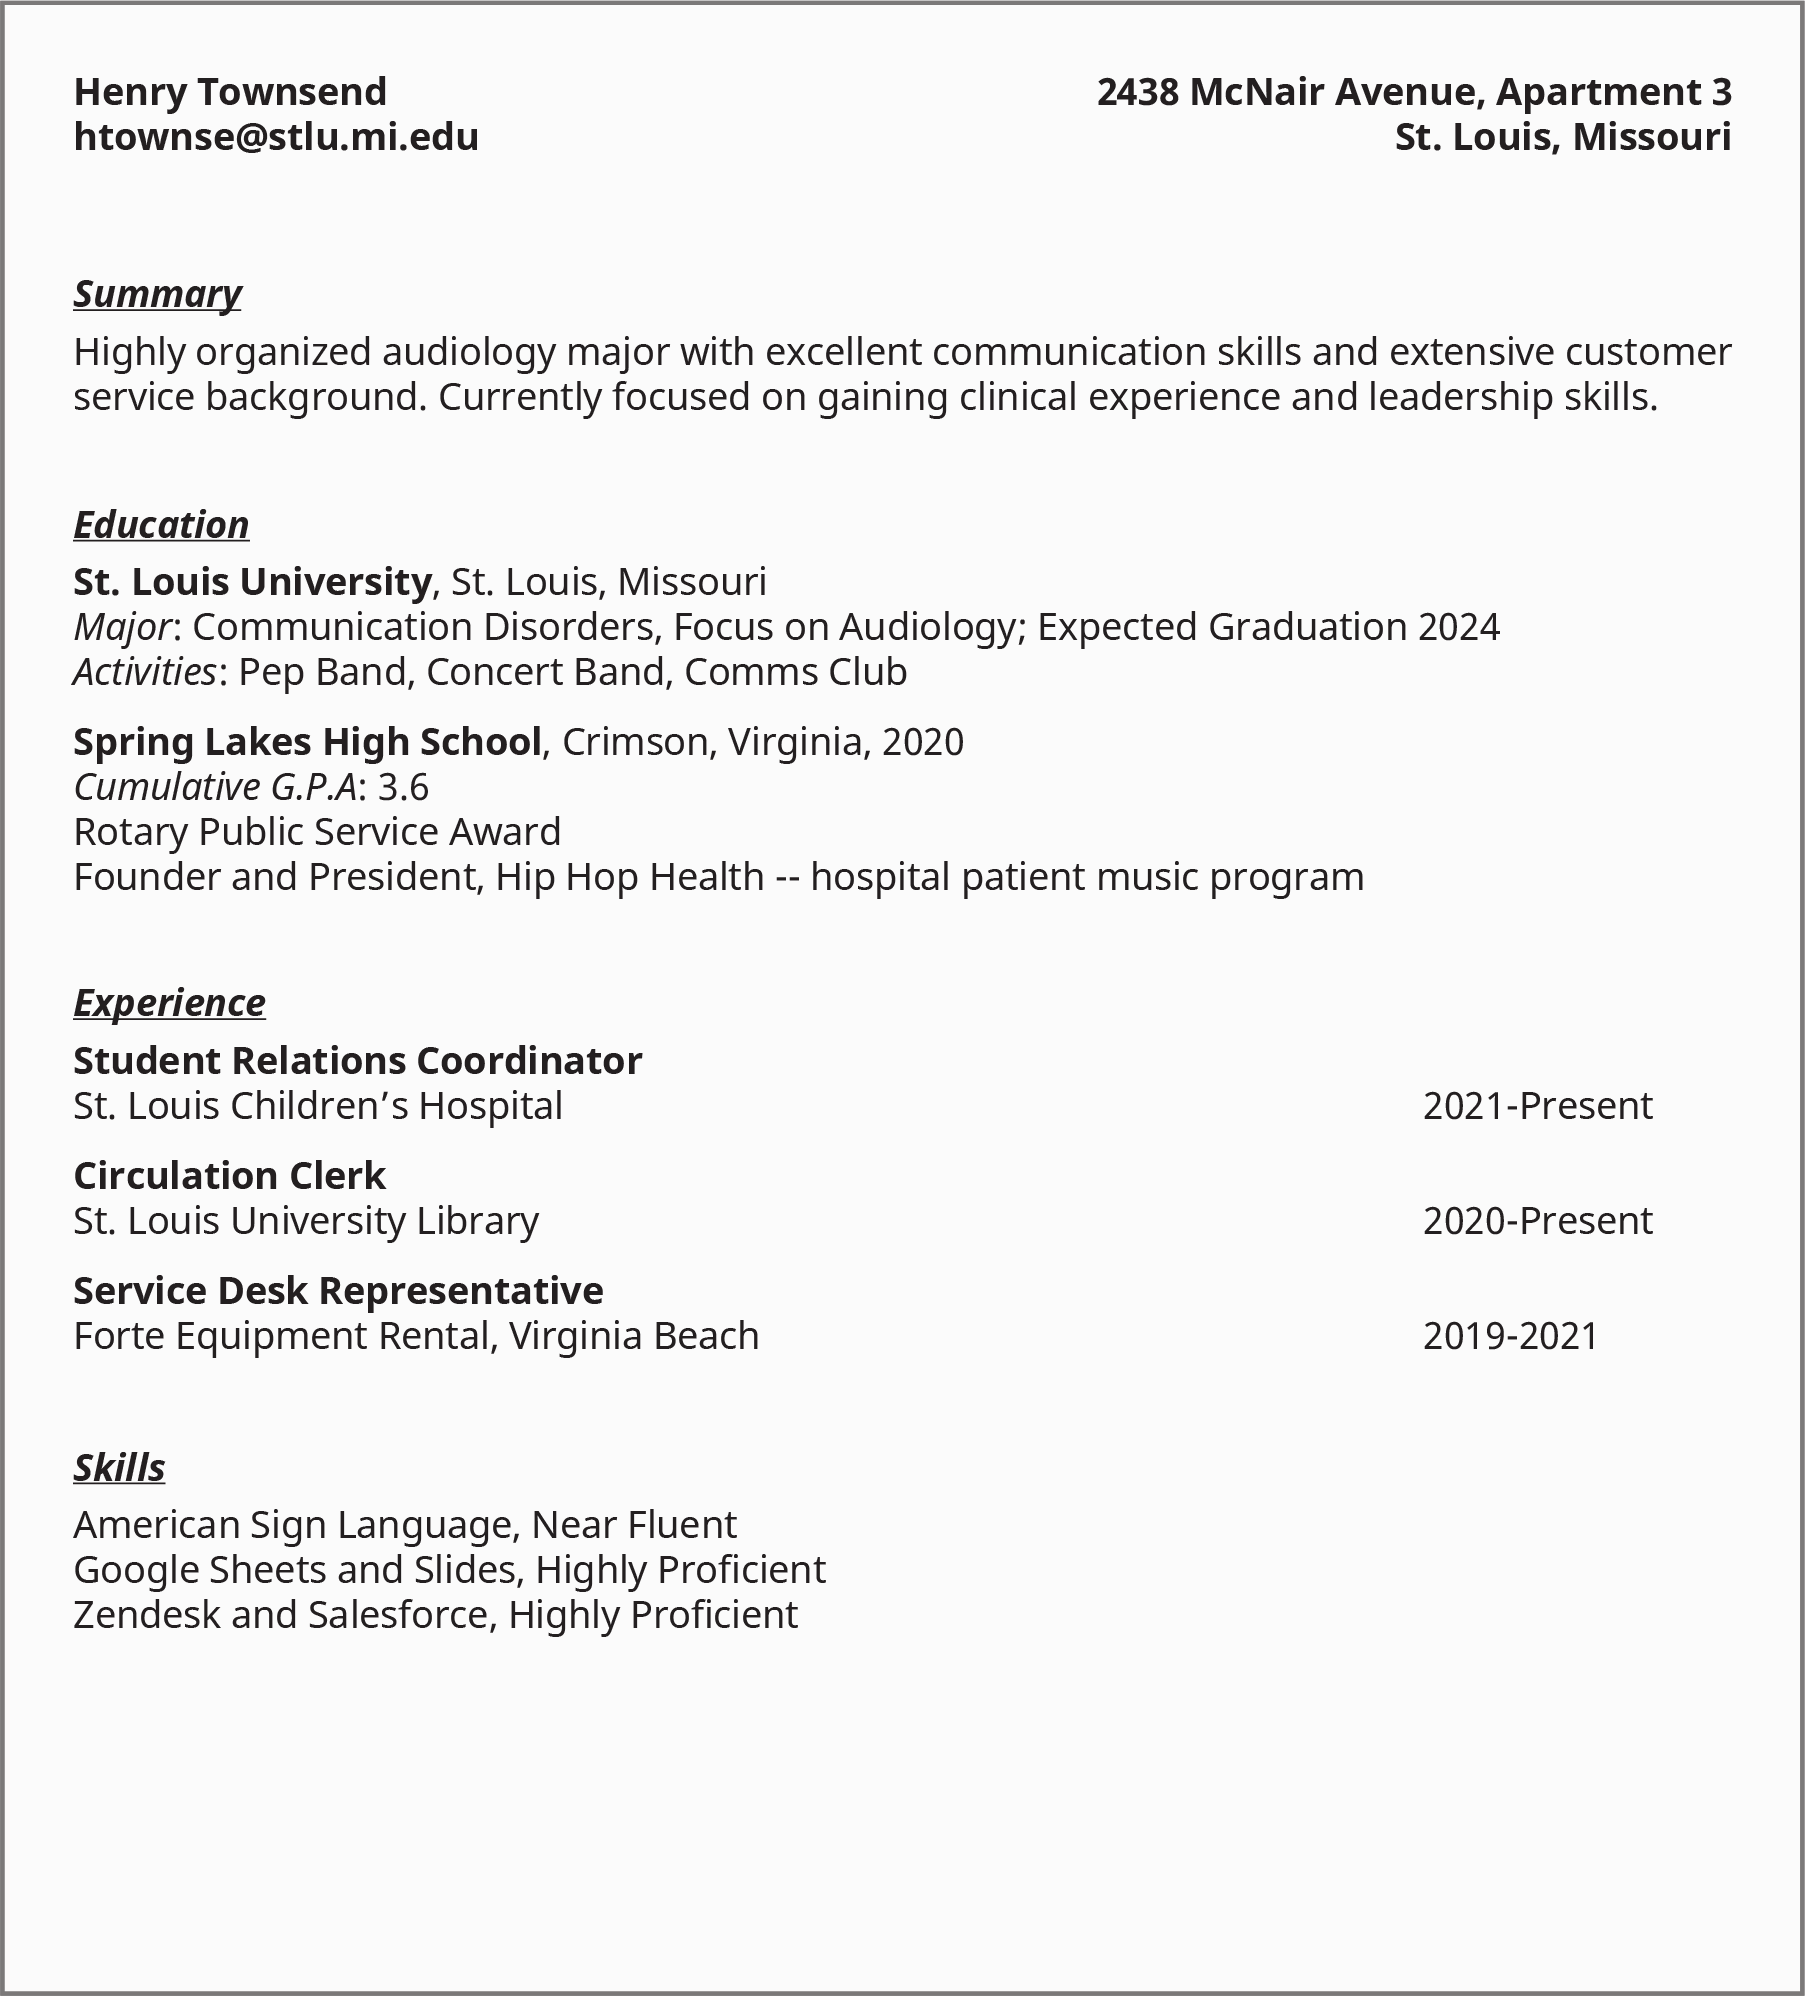 An image shows a sample resume from a college student listing details under the heads “Summary,” “Education,” “Experience,” and “Skills.”